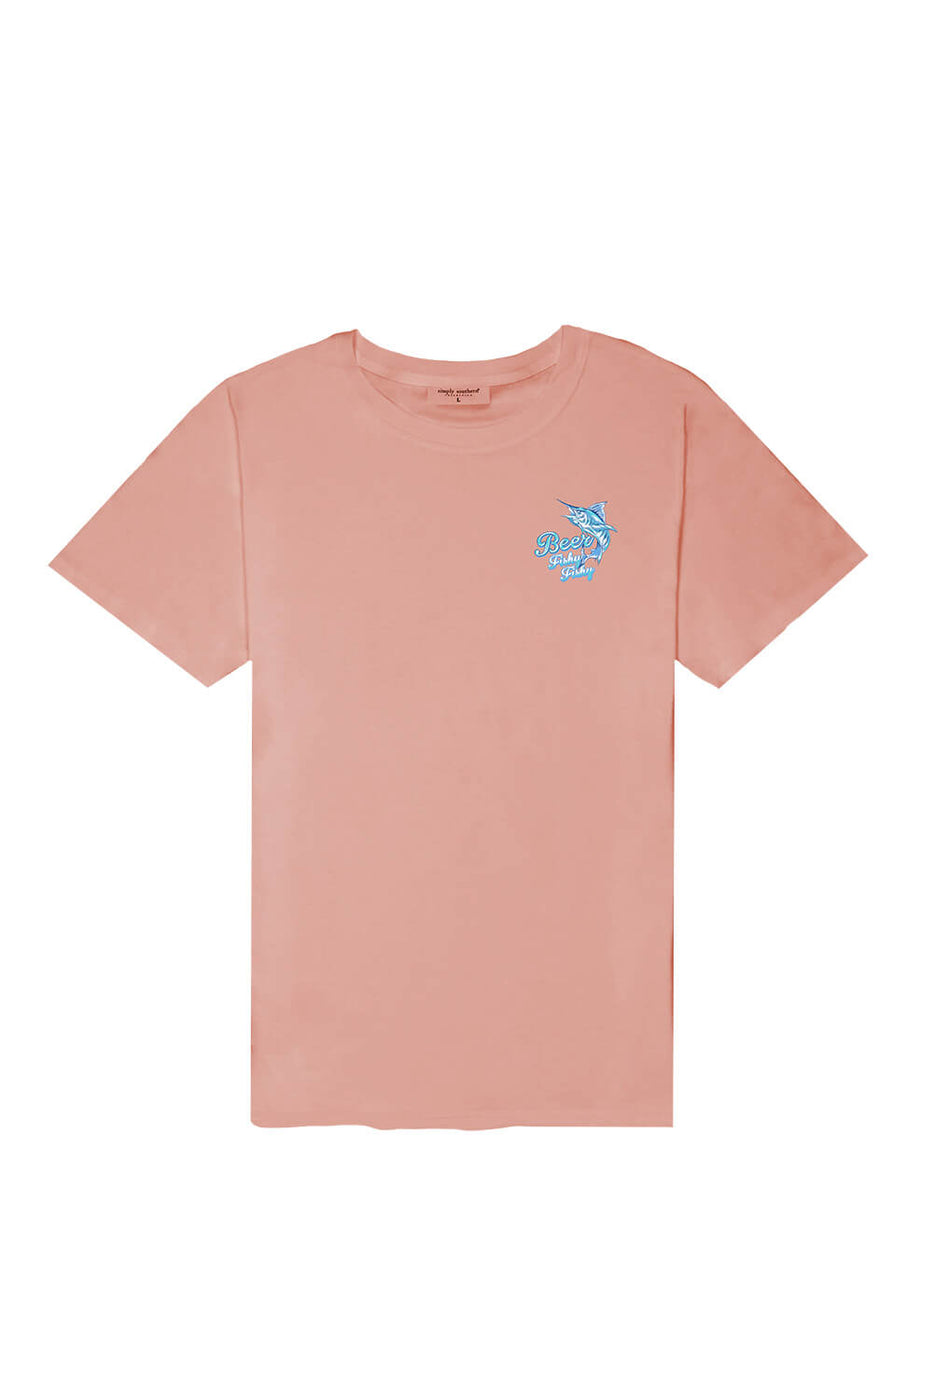 Simply Southern Beer Fishy Fishy T-Shirt for Men in Pink